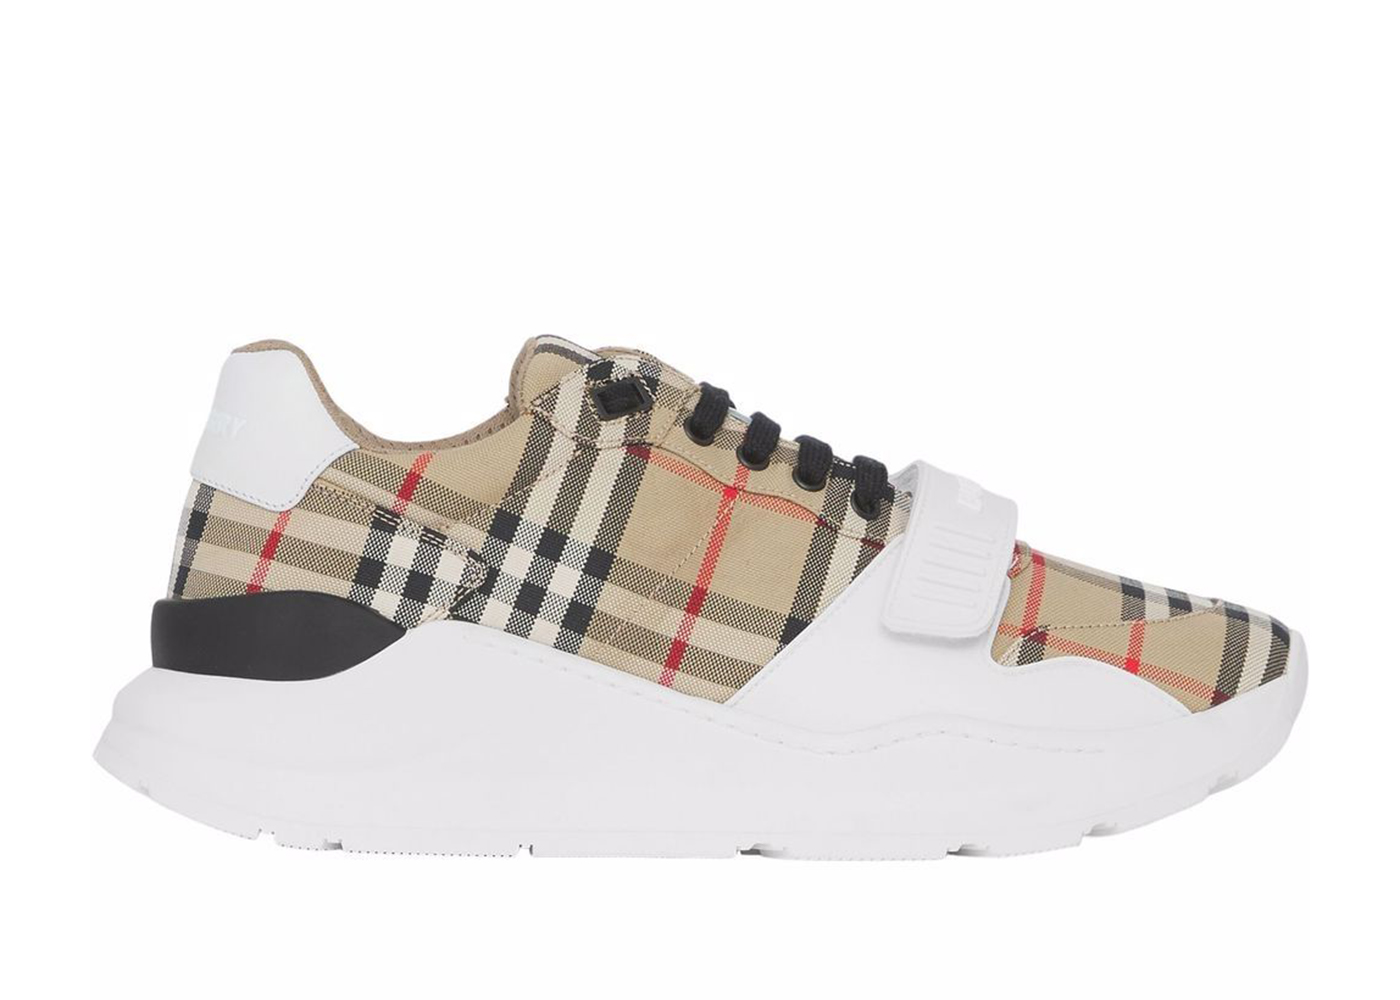 Buy Burberry Shoes and Slides - StockX